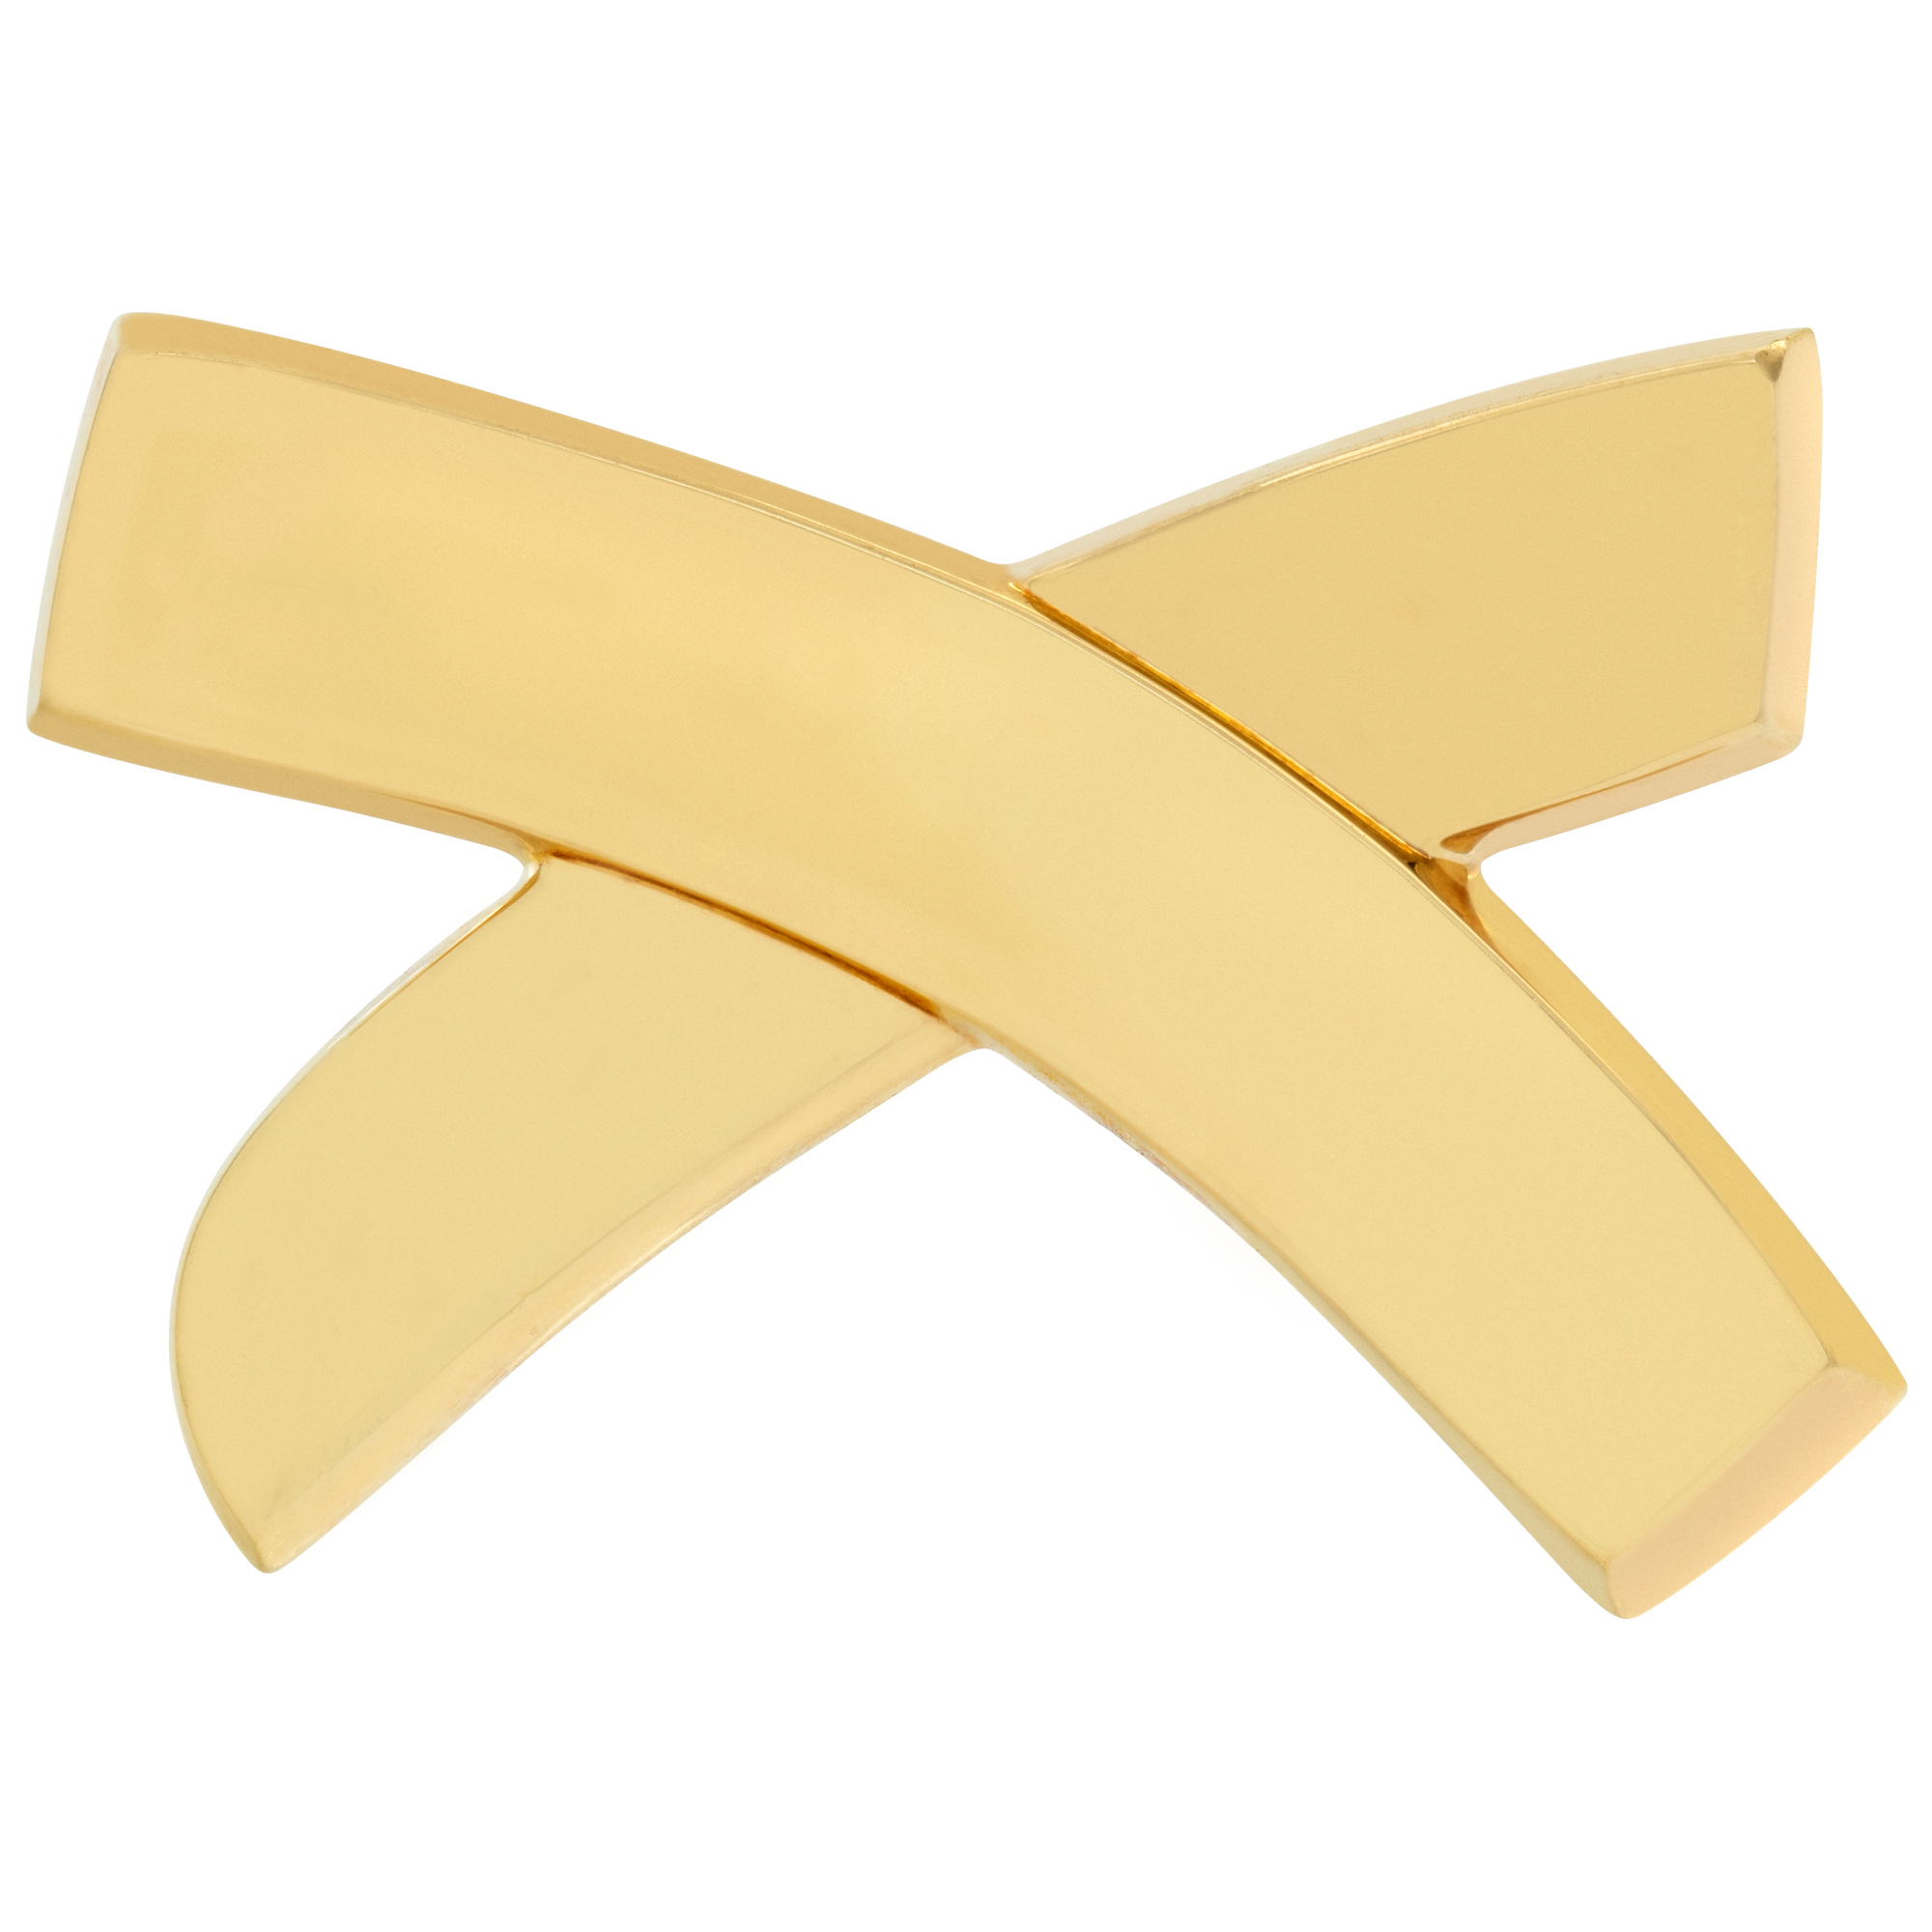 Tiffany & Co. by Paloma Picasso "Grafitti" Collection  X brooch in 18k image 1